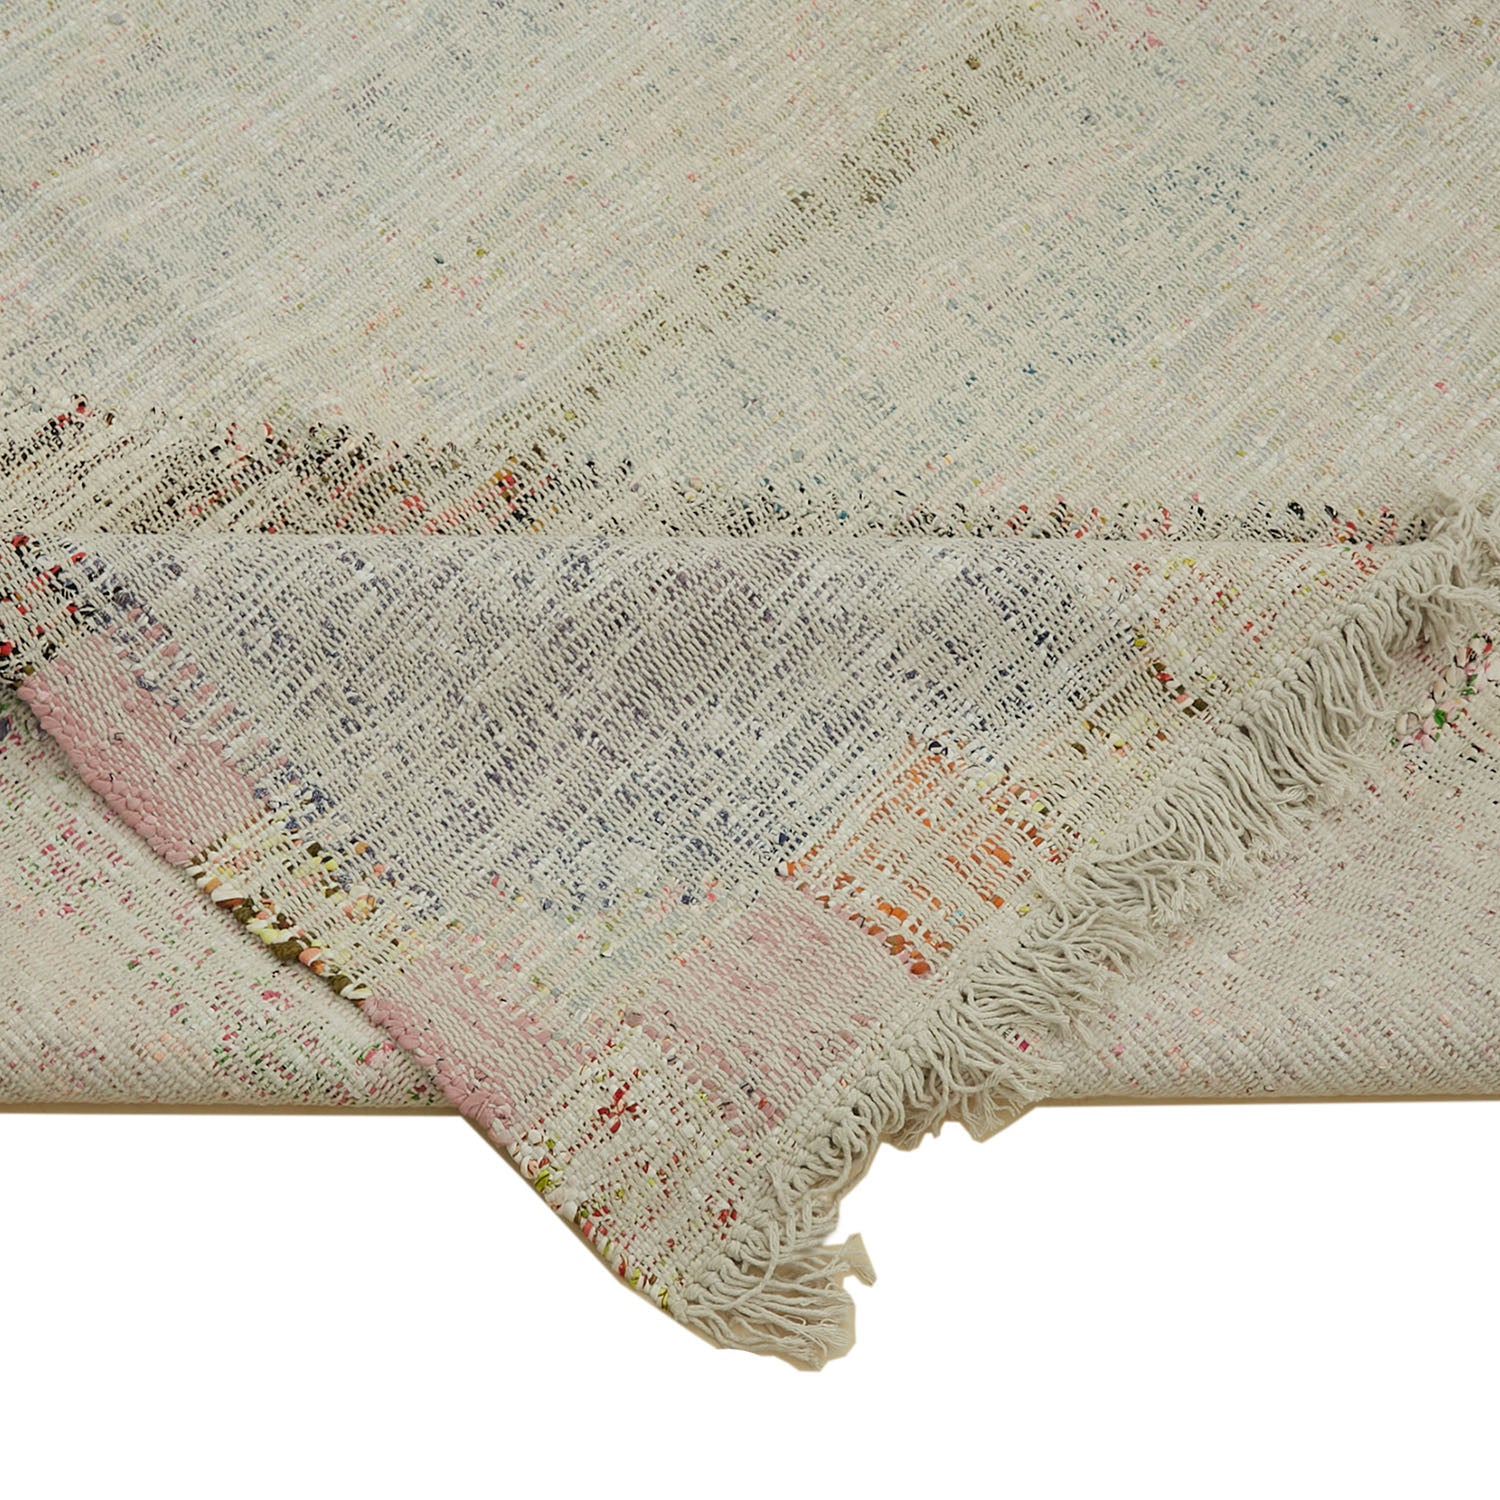 Close-up shot of a textured off-white fabric with multi-colored threads.